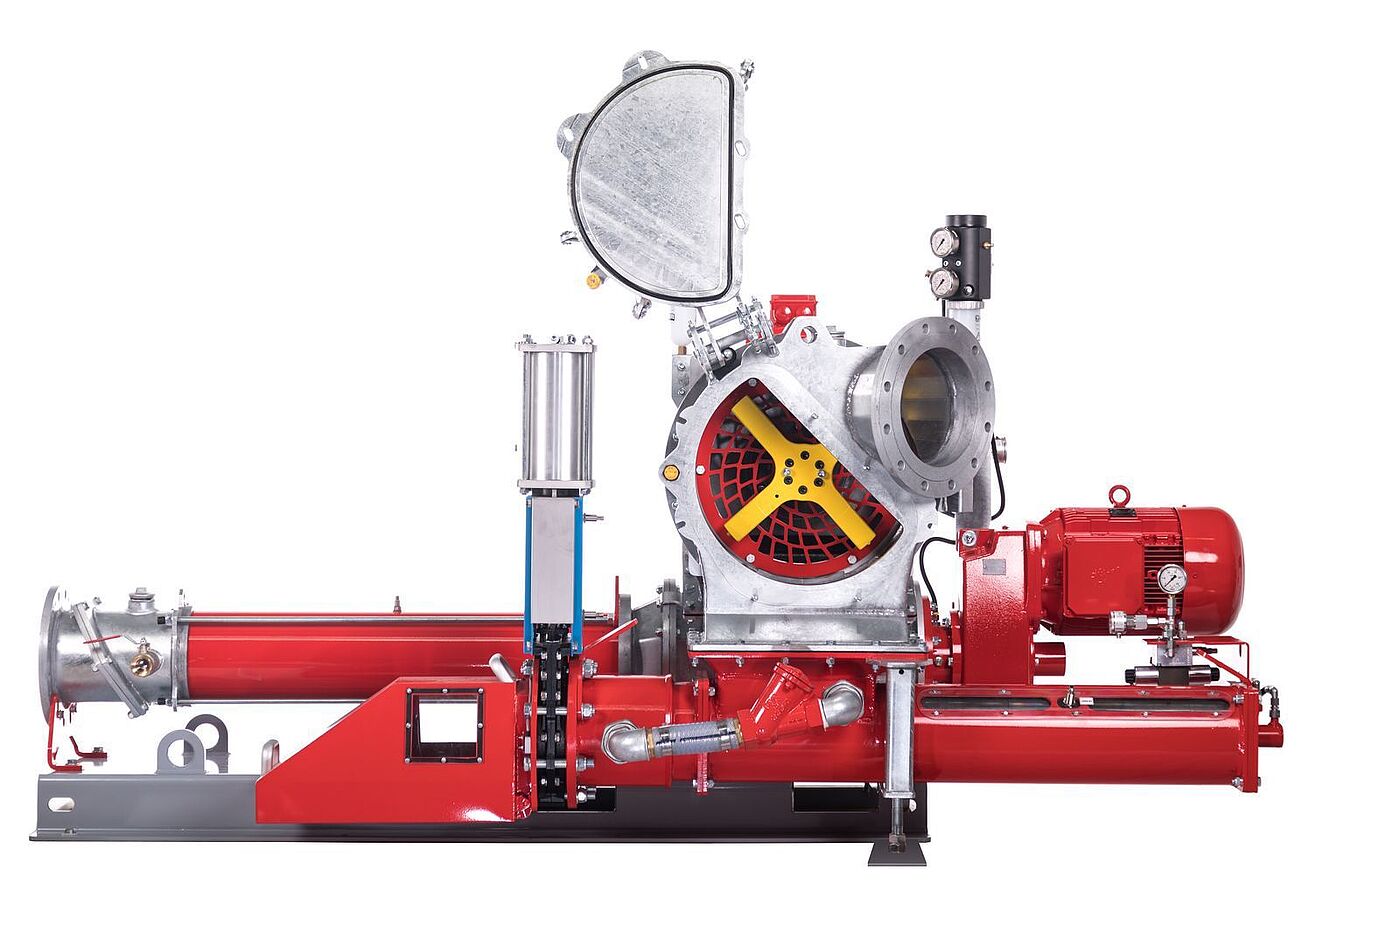 CC-Cut / RCX-48G: The all-purpose pump system by Vogelsang